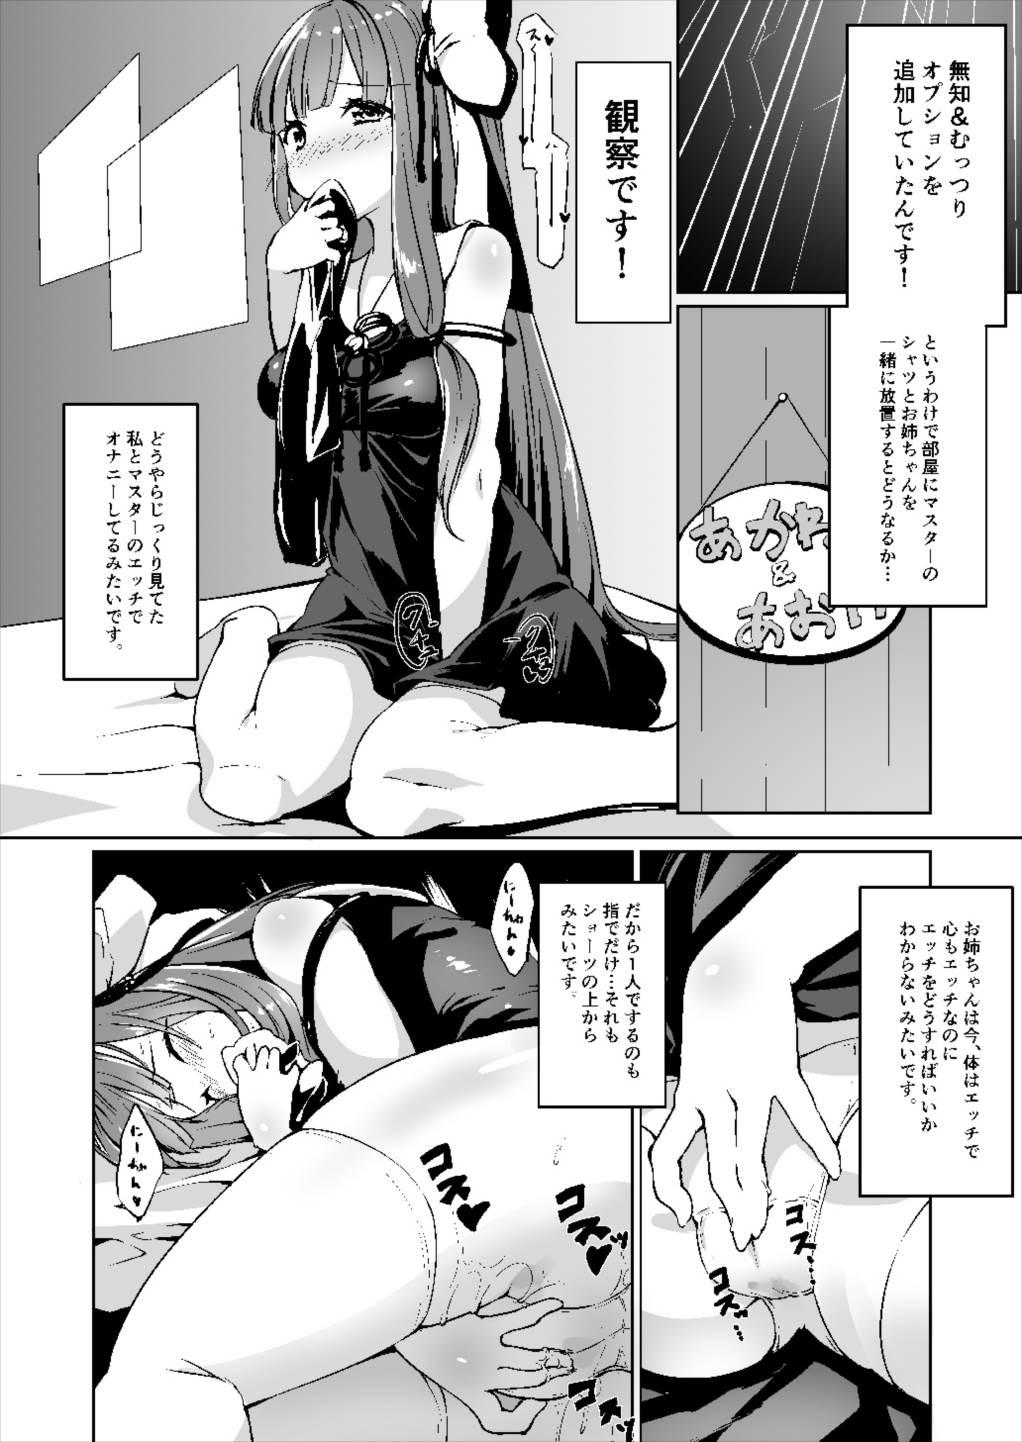 Stepbrother コトノハラバーズ VOL.06 【お姉ちゃん観察日記】 - Vocaloid Voiceroid Bukkake Boys - Page 8